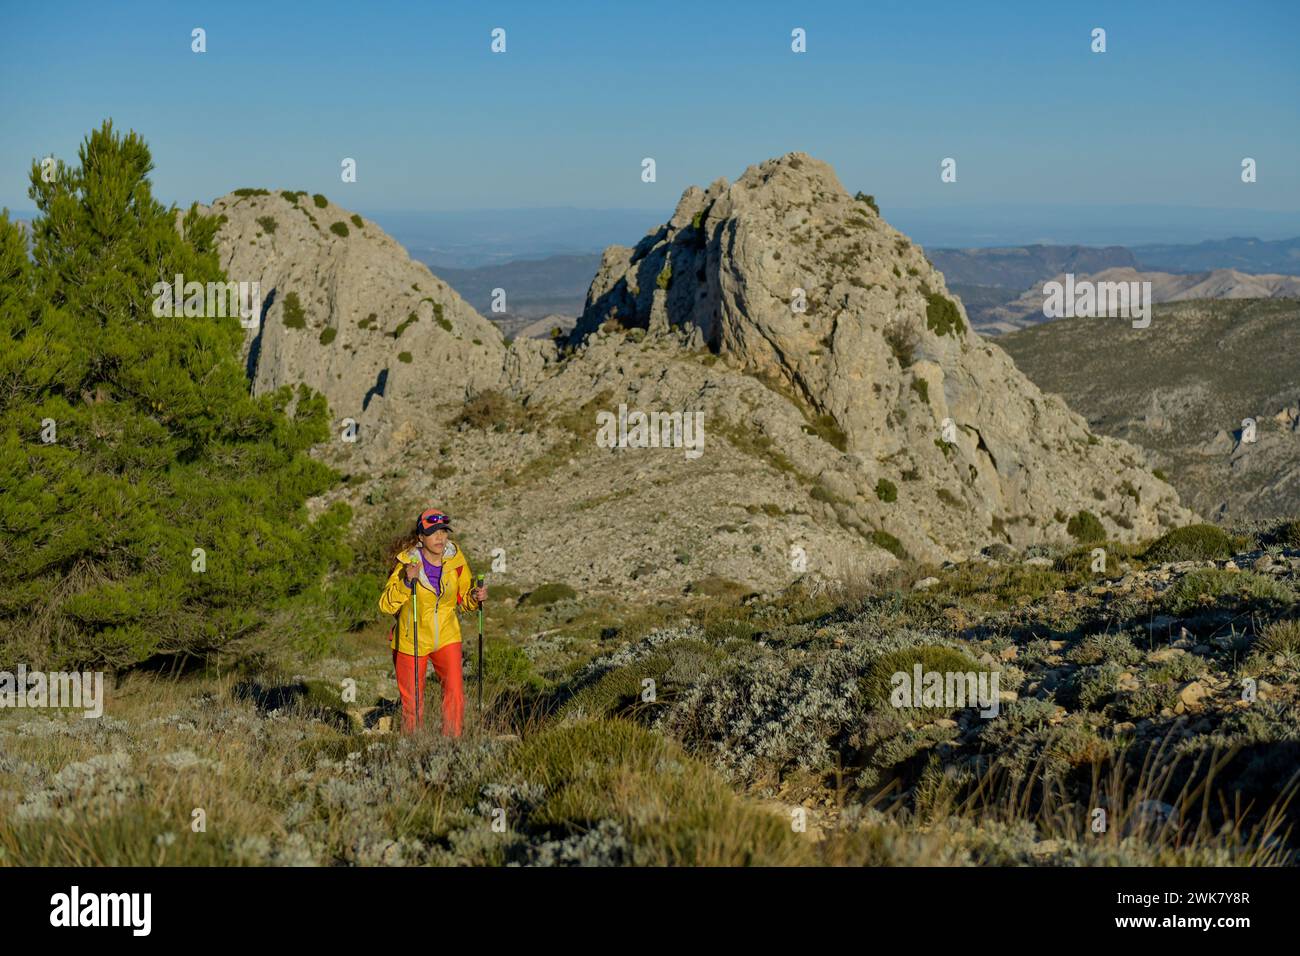 A woman hiking in the Costa Blanca mountains, Alicante, Spain - stock photo Stock Photo